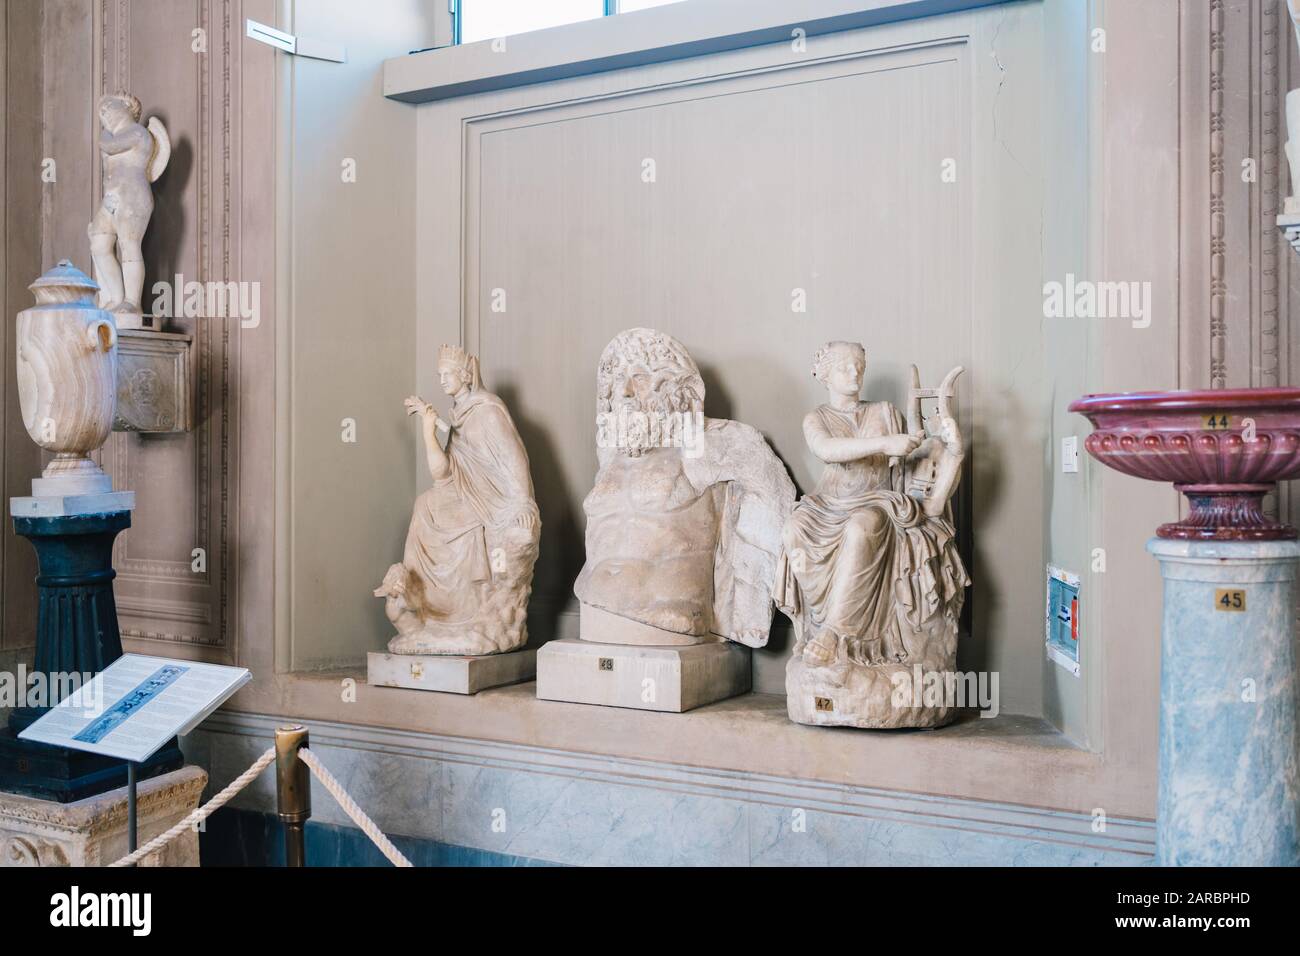 Rome, Italy - Jan 3, 2020: Inside the Vatican Museum. Statues featuring marble busts and ancient sculptures. Stock Photo